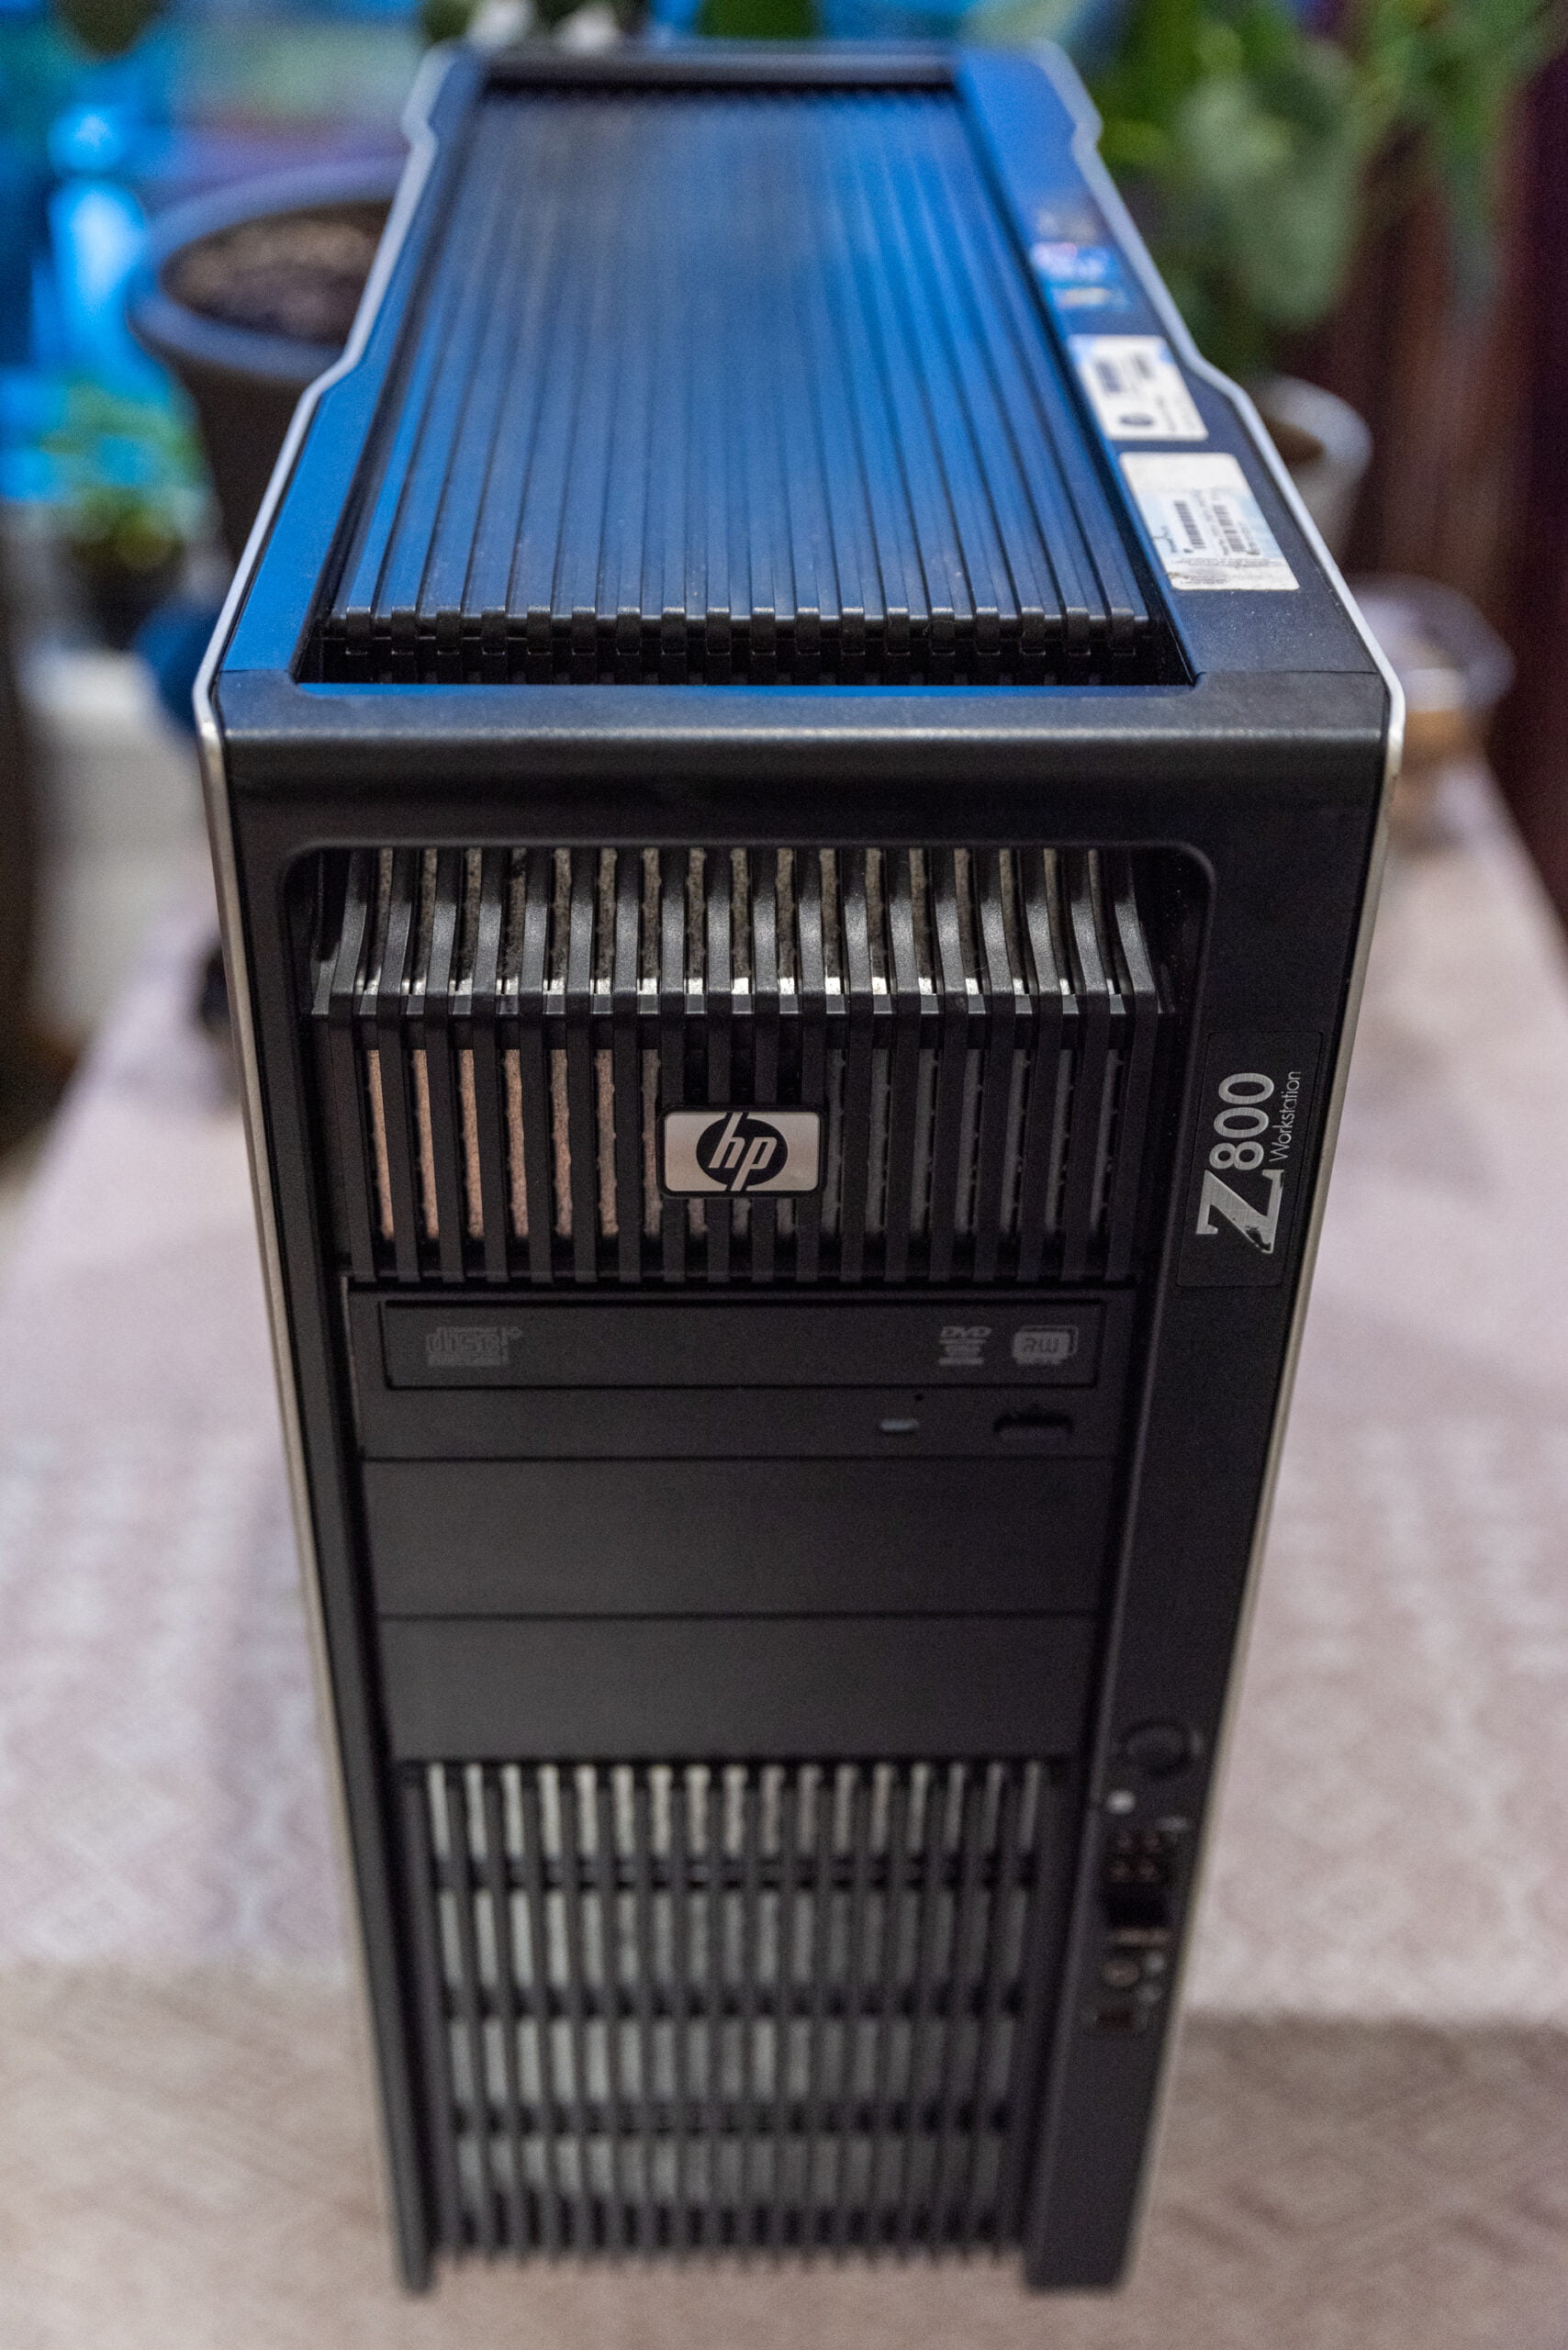 Frontal image of Z800 by HP